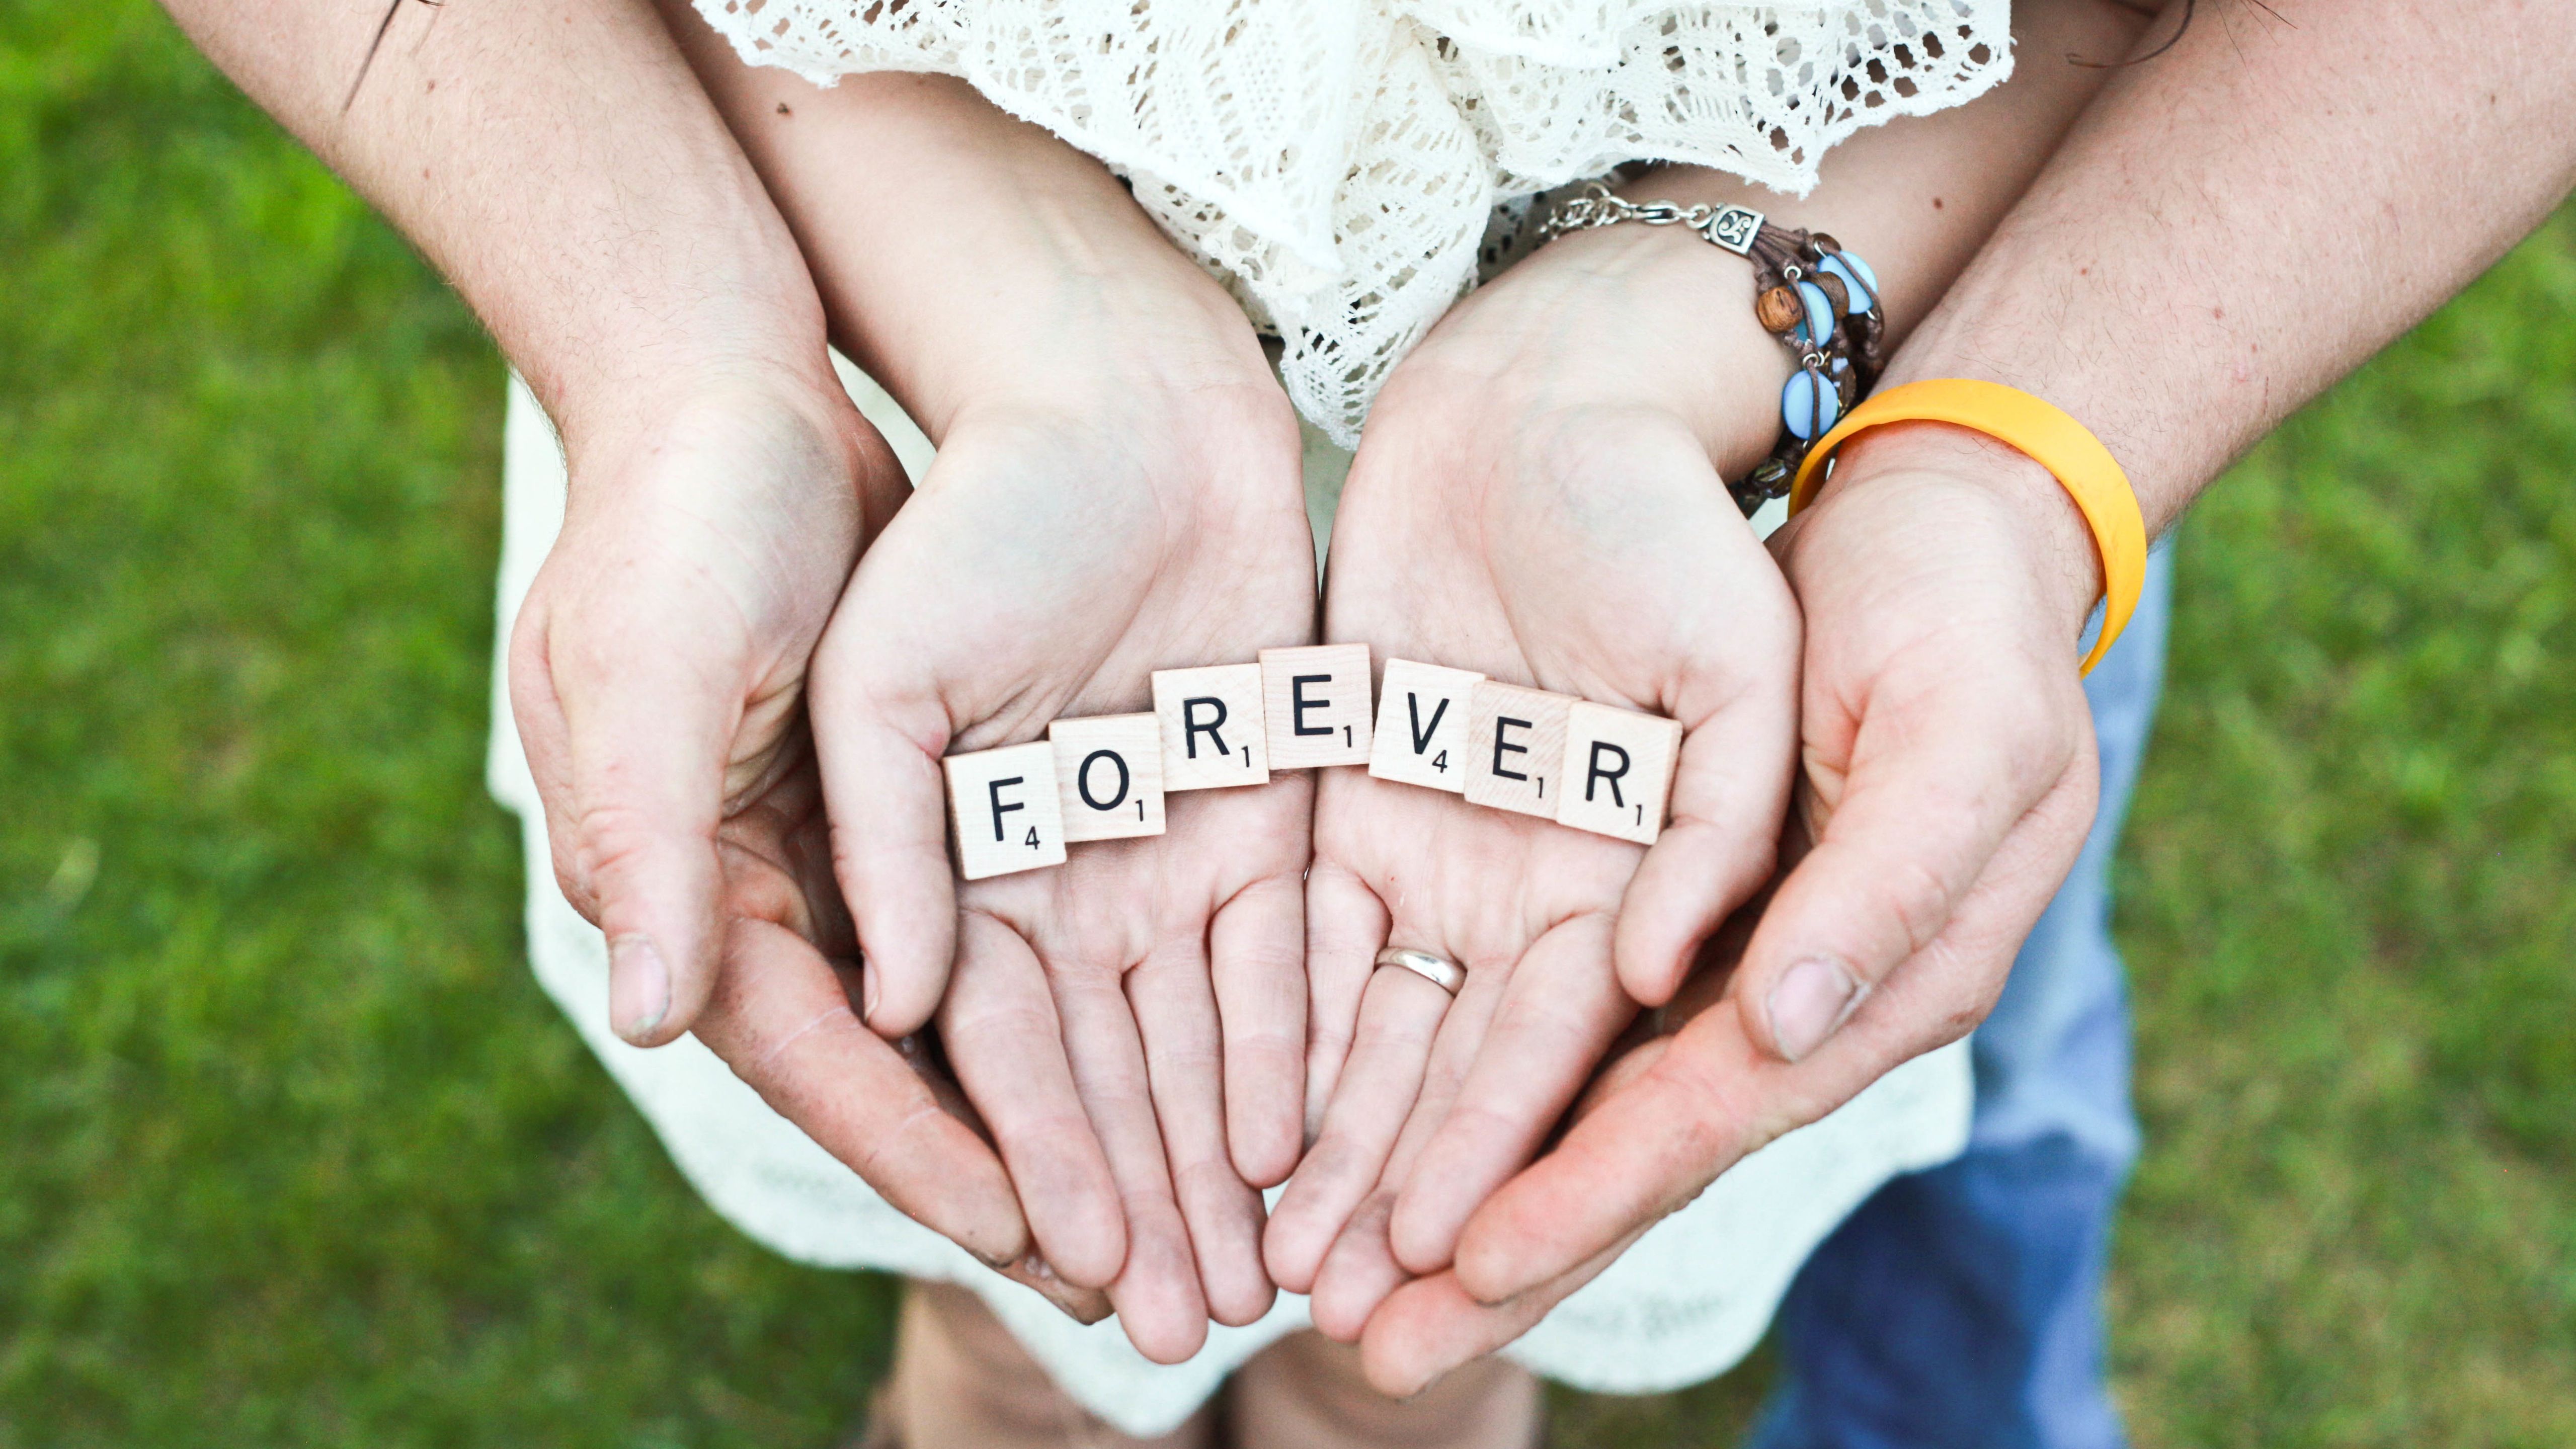 Download 5120x2880 Man, woman, forever, love wallpaper